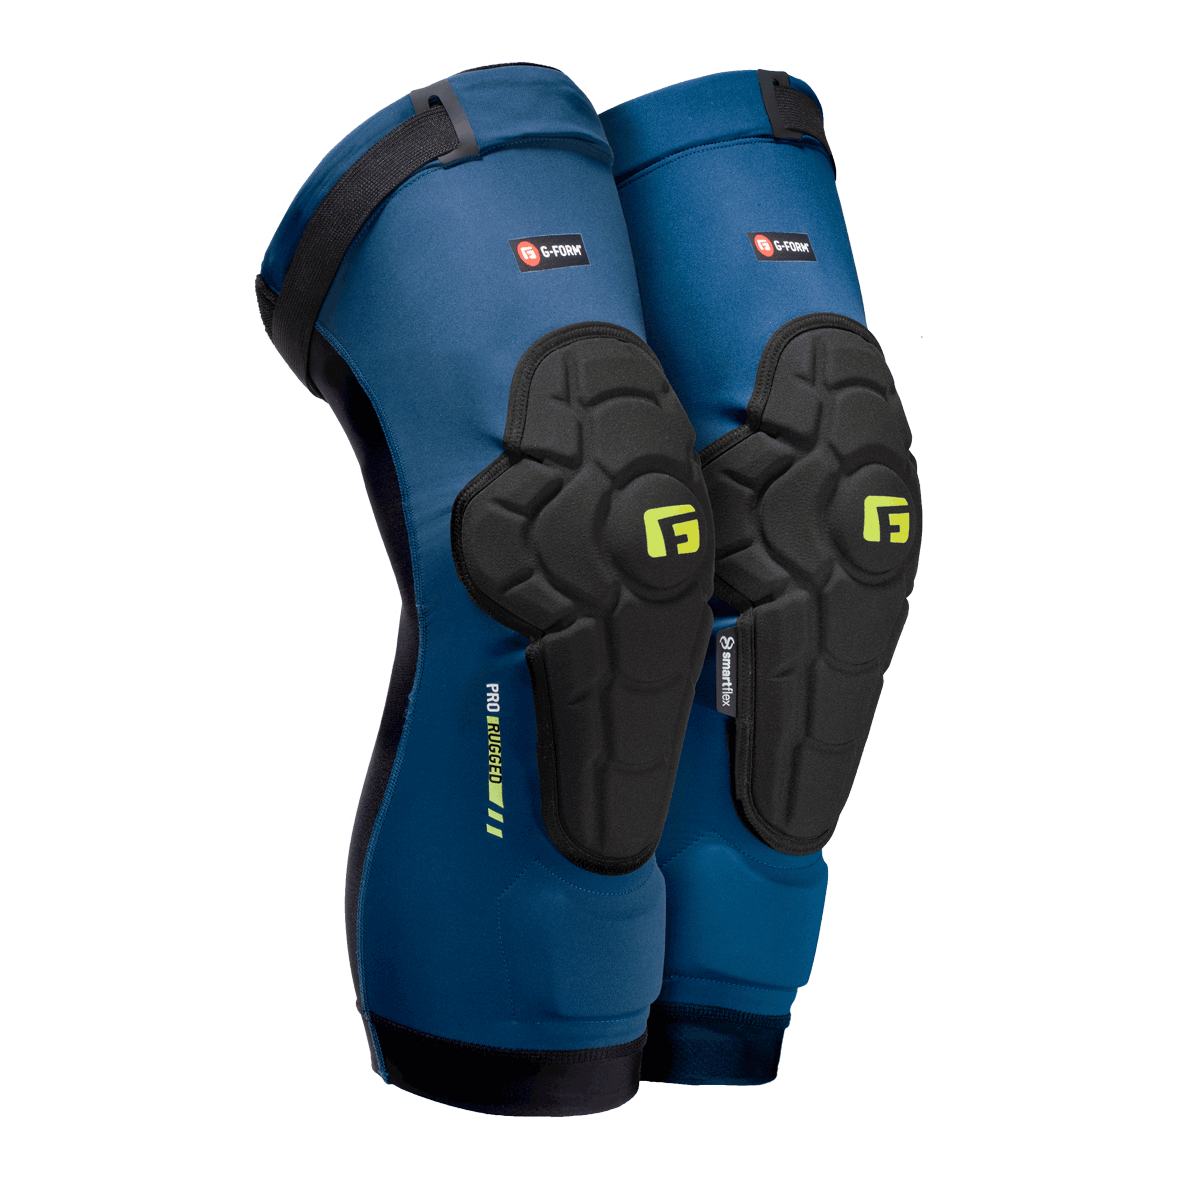 G-Form Pro Rugged 2 knee pad review